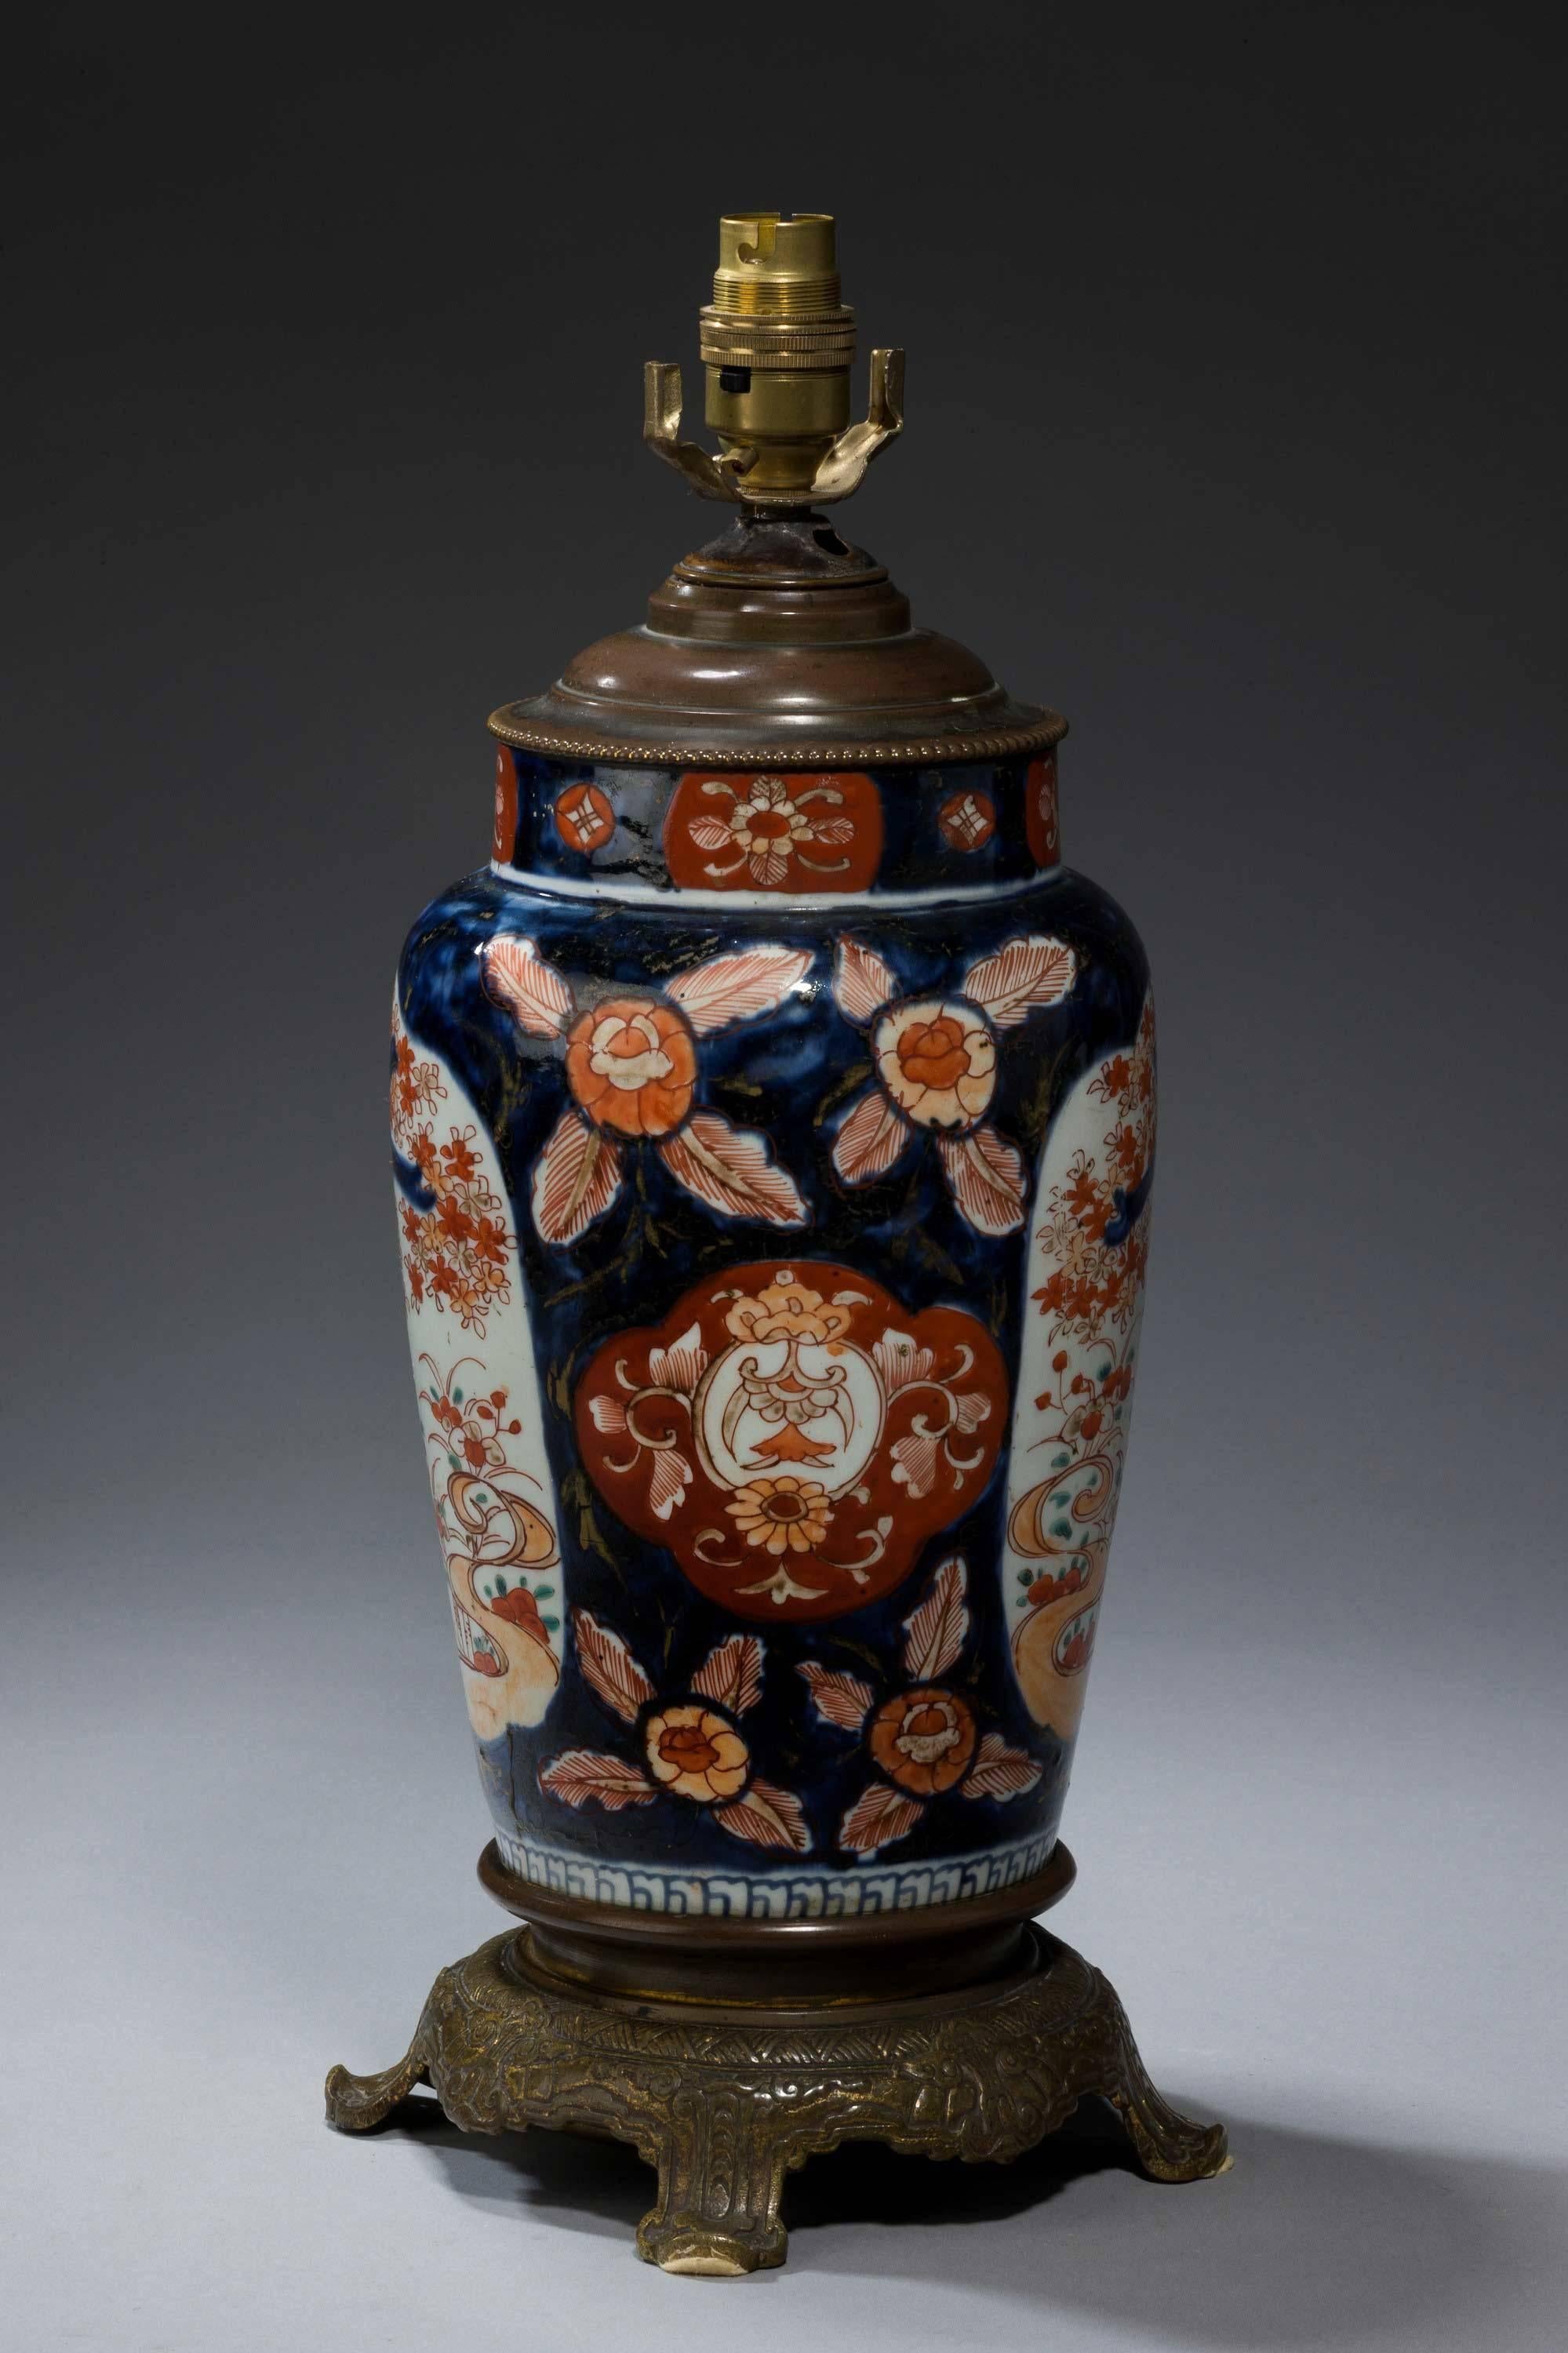 Japanese Imari ovoid porcelain vase lamp with original bronze mounts.

Imari began to be exported to Europe, because the Chinese kilns at Ching-te-Chen were damaged in the political chaos and the new Qing dynasty government stopped trade in